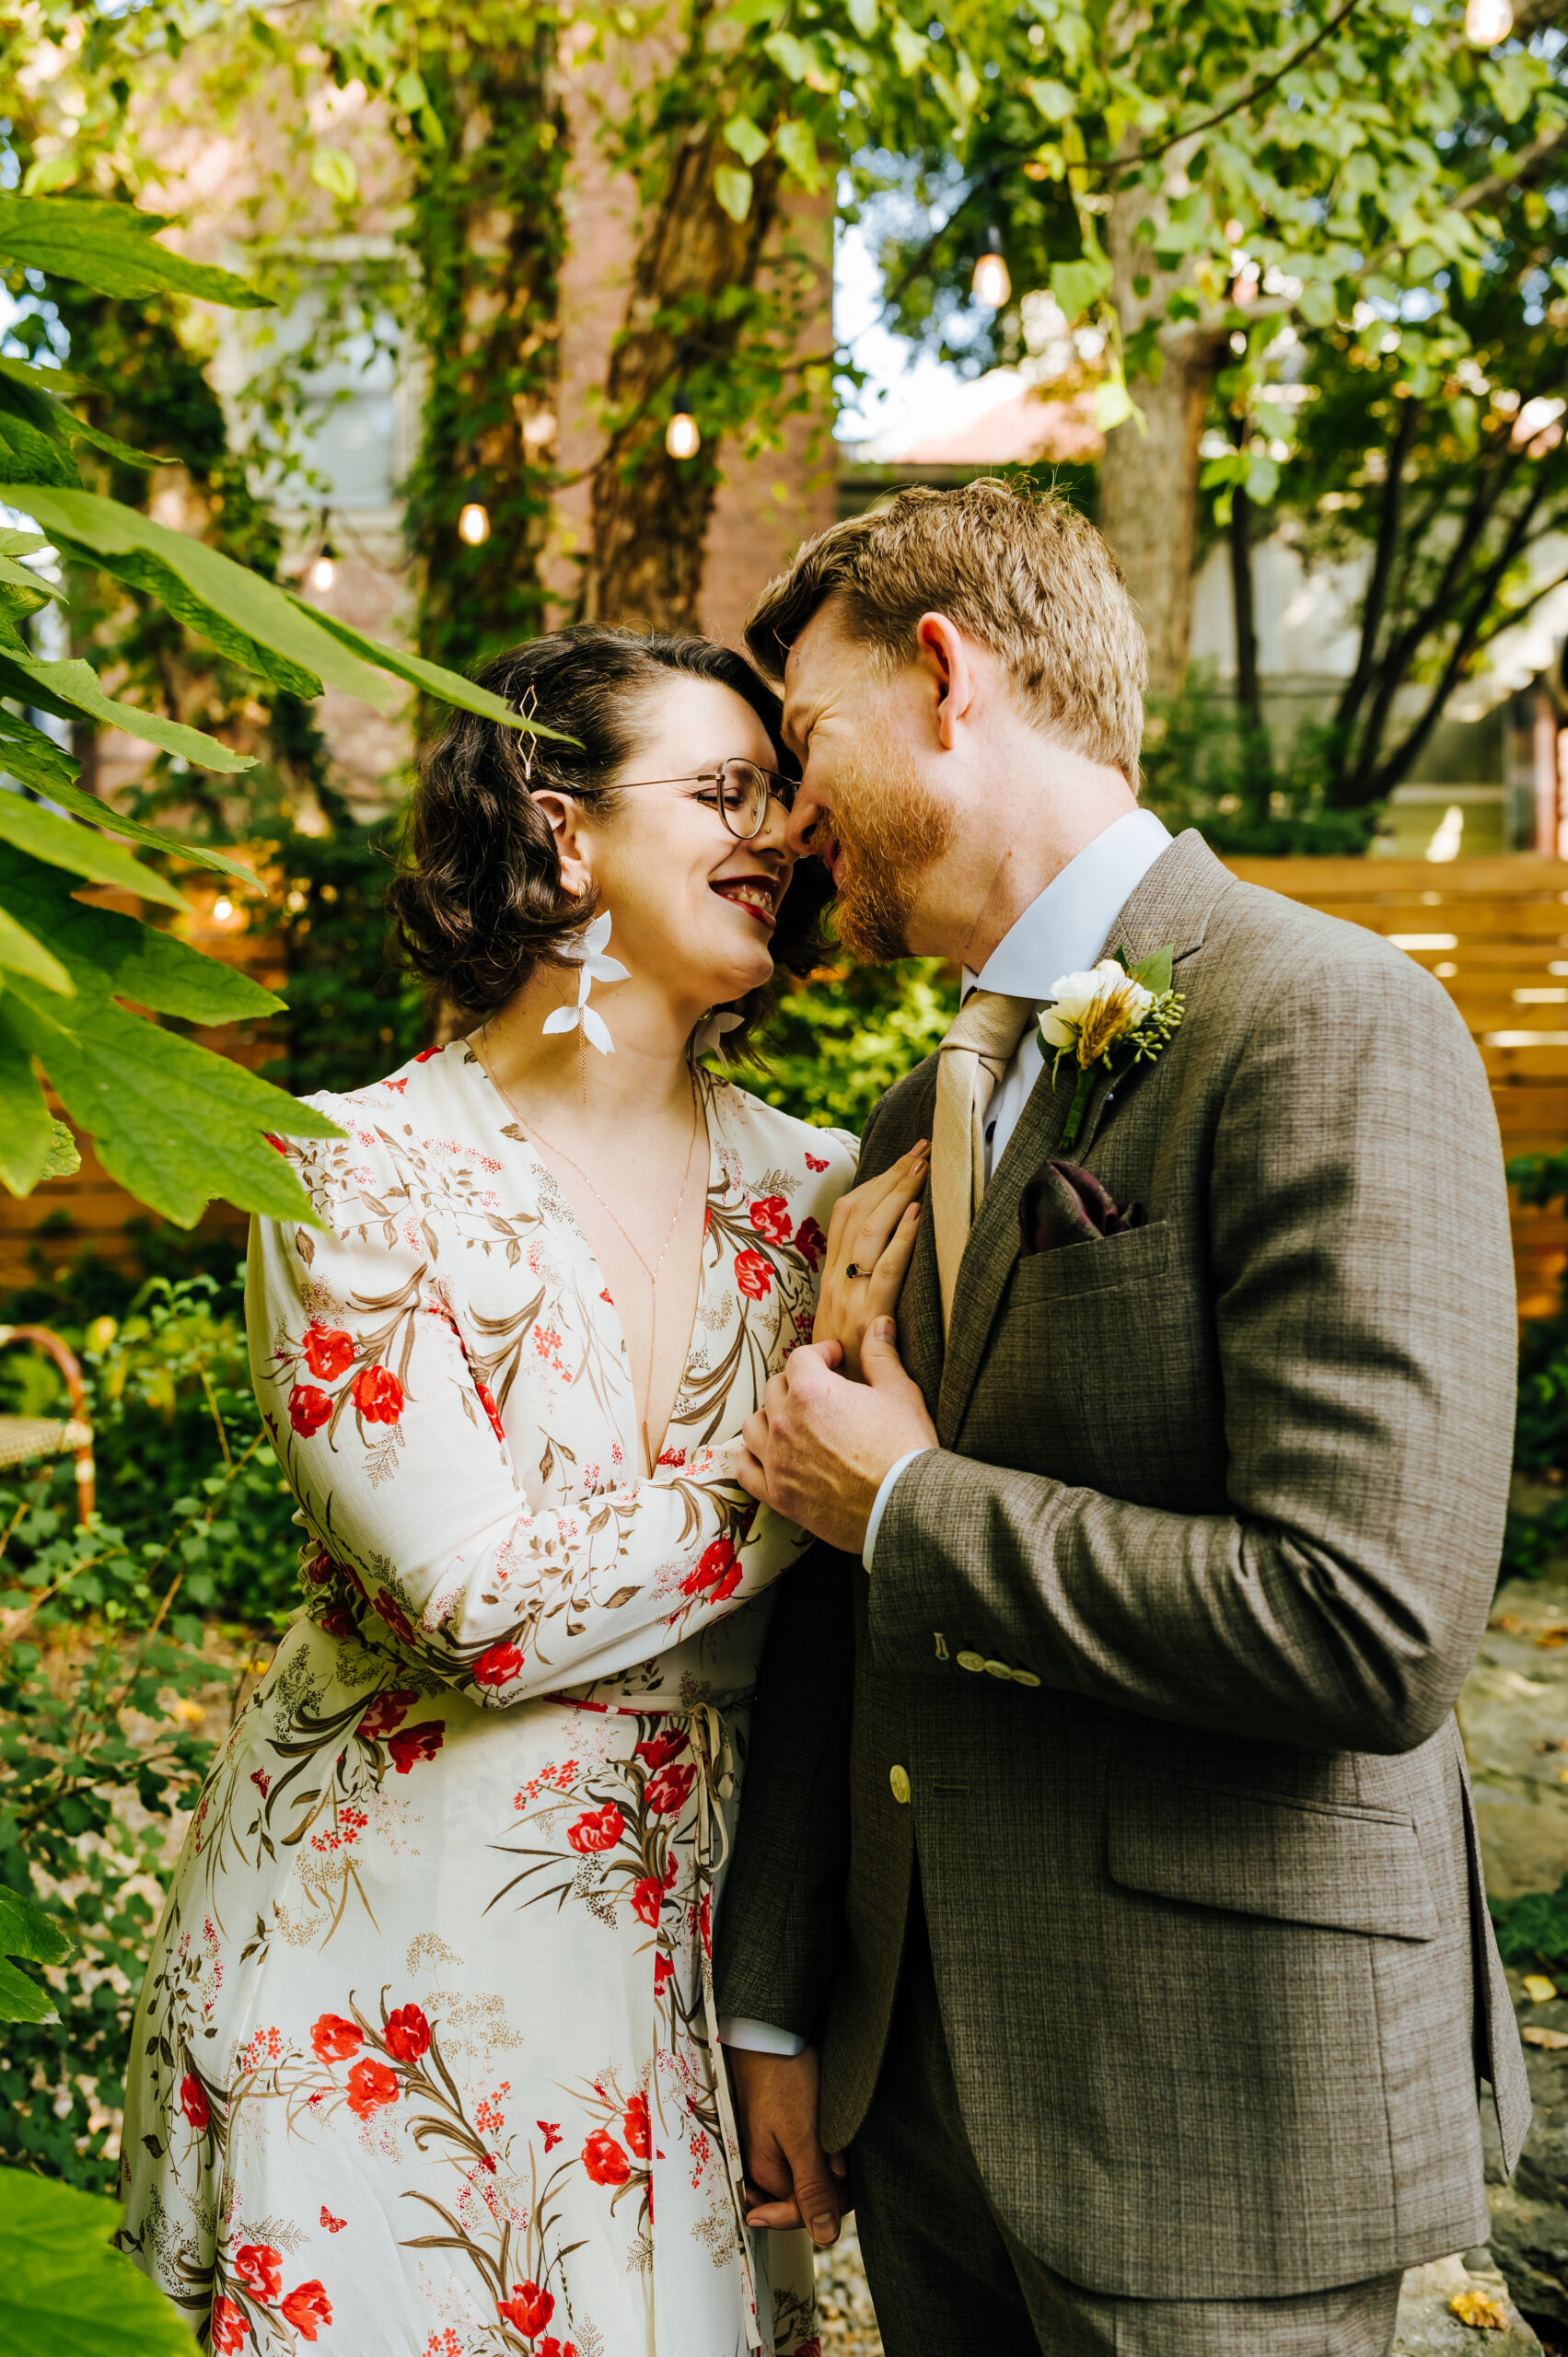 Couple embraces and smiles at one another. They are standing in a lush garden with wedding attire.